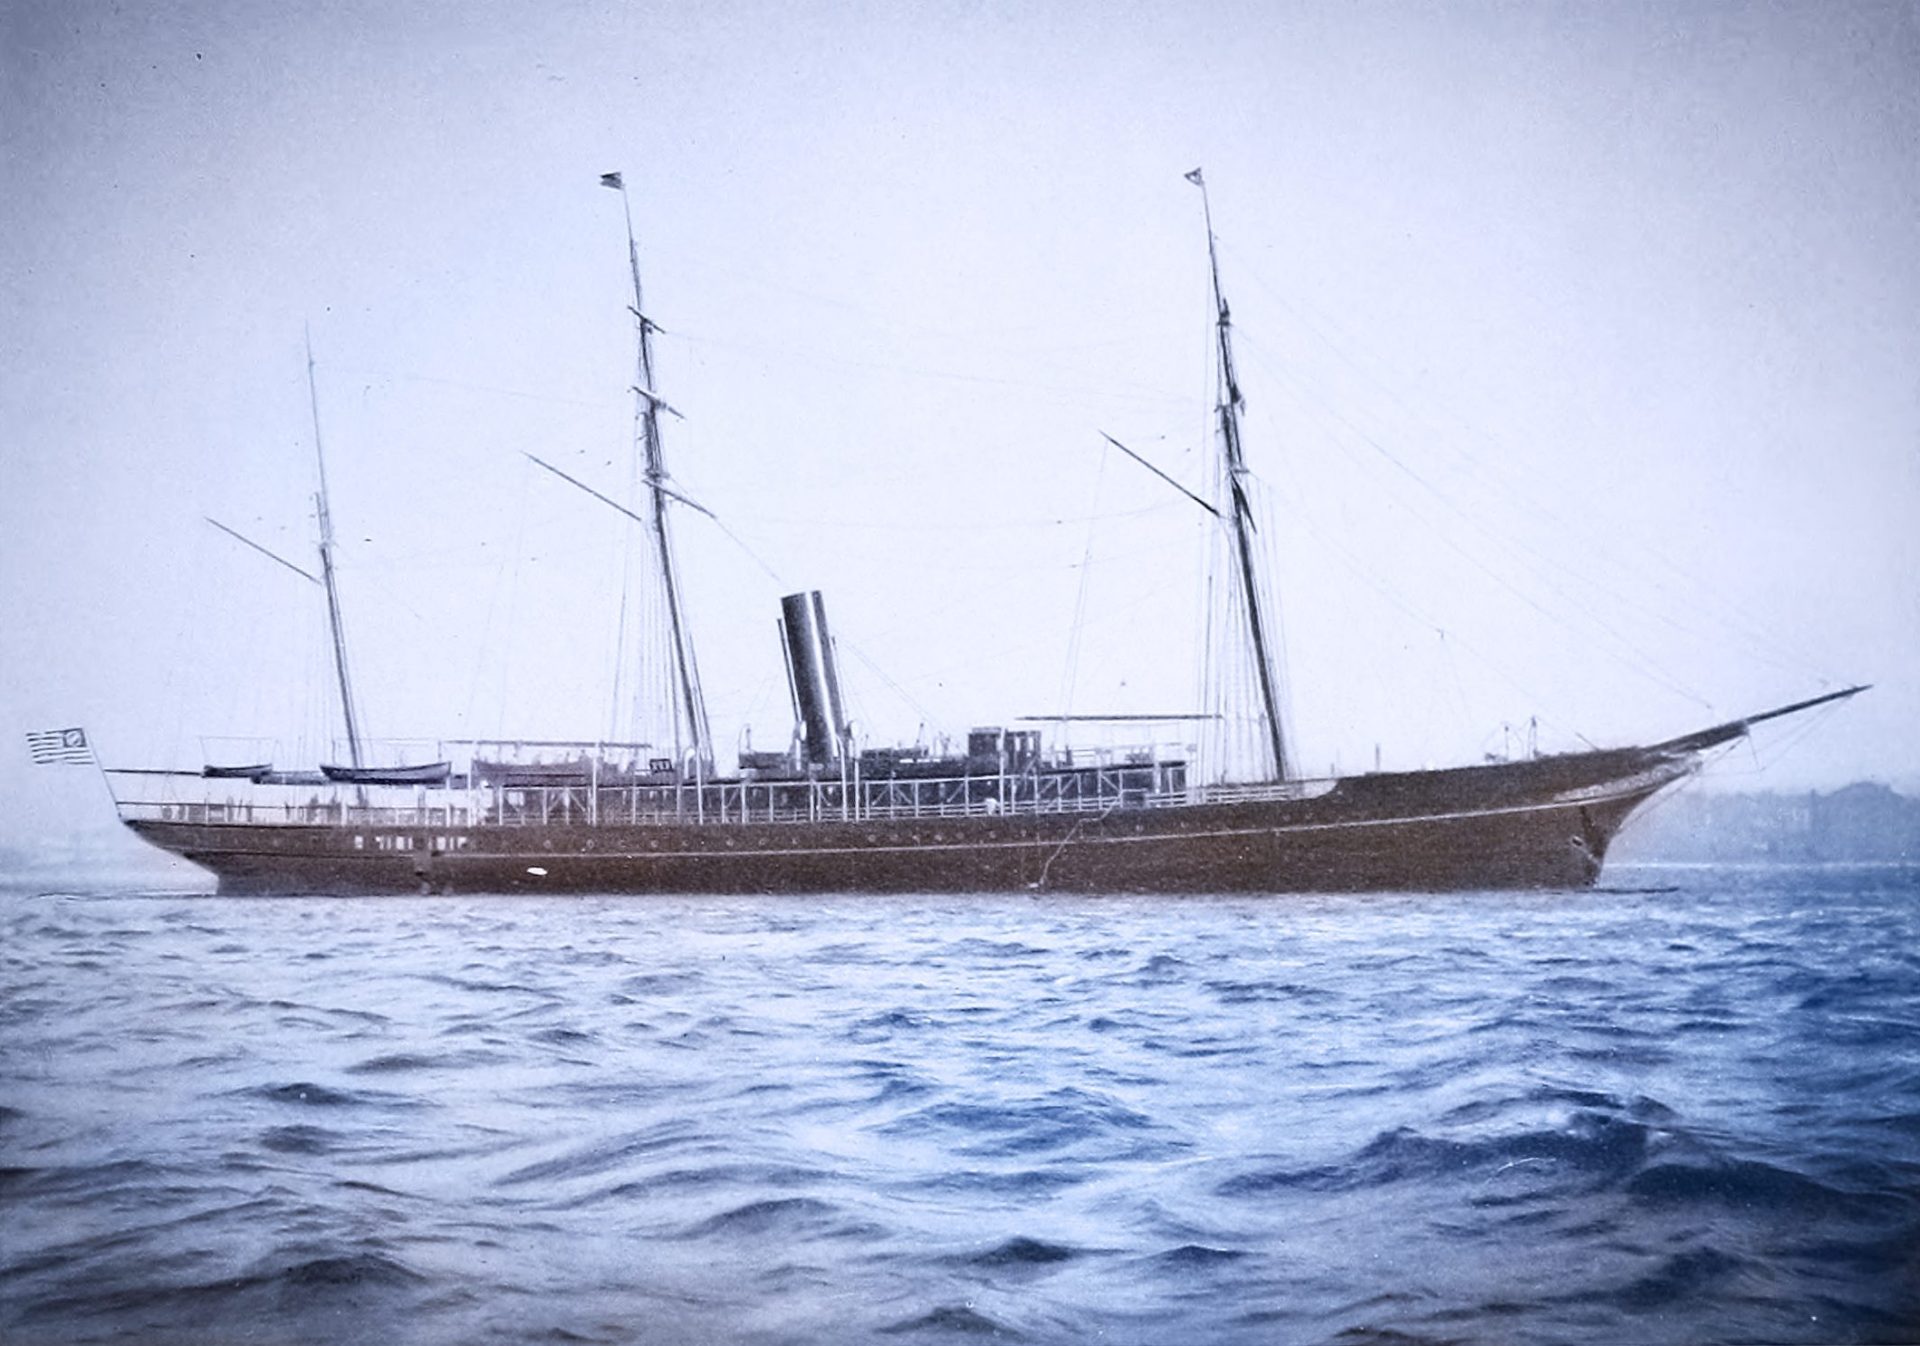 The photo shows a 19th century yacht in the middle of a large body of water. The yacht is very large and has three tall masts. The hull is dark and appears to be made of wood.